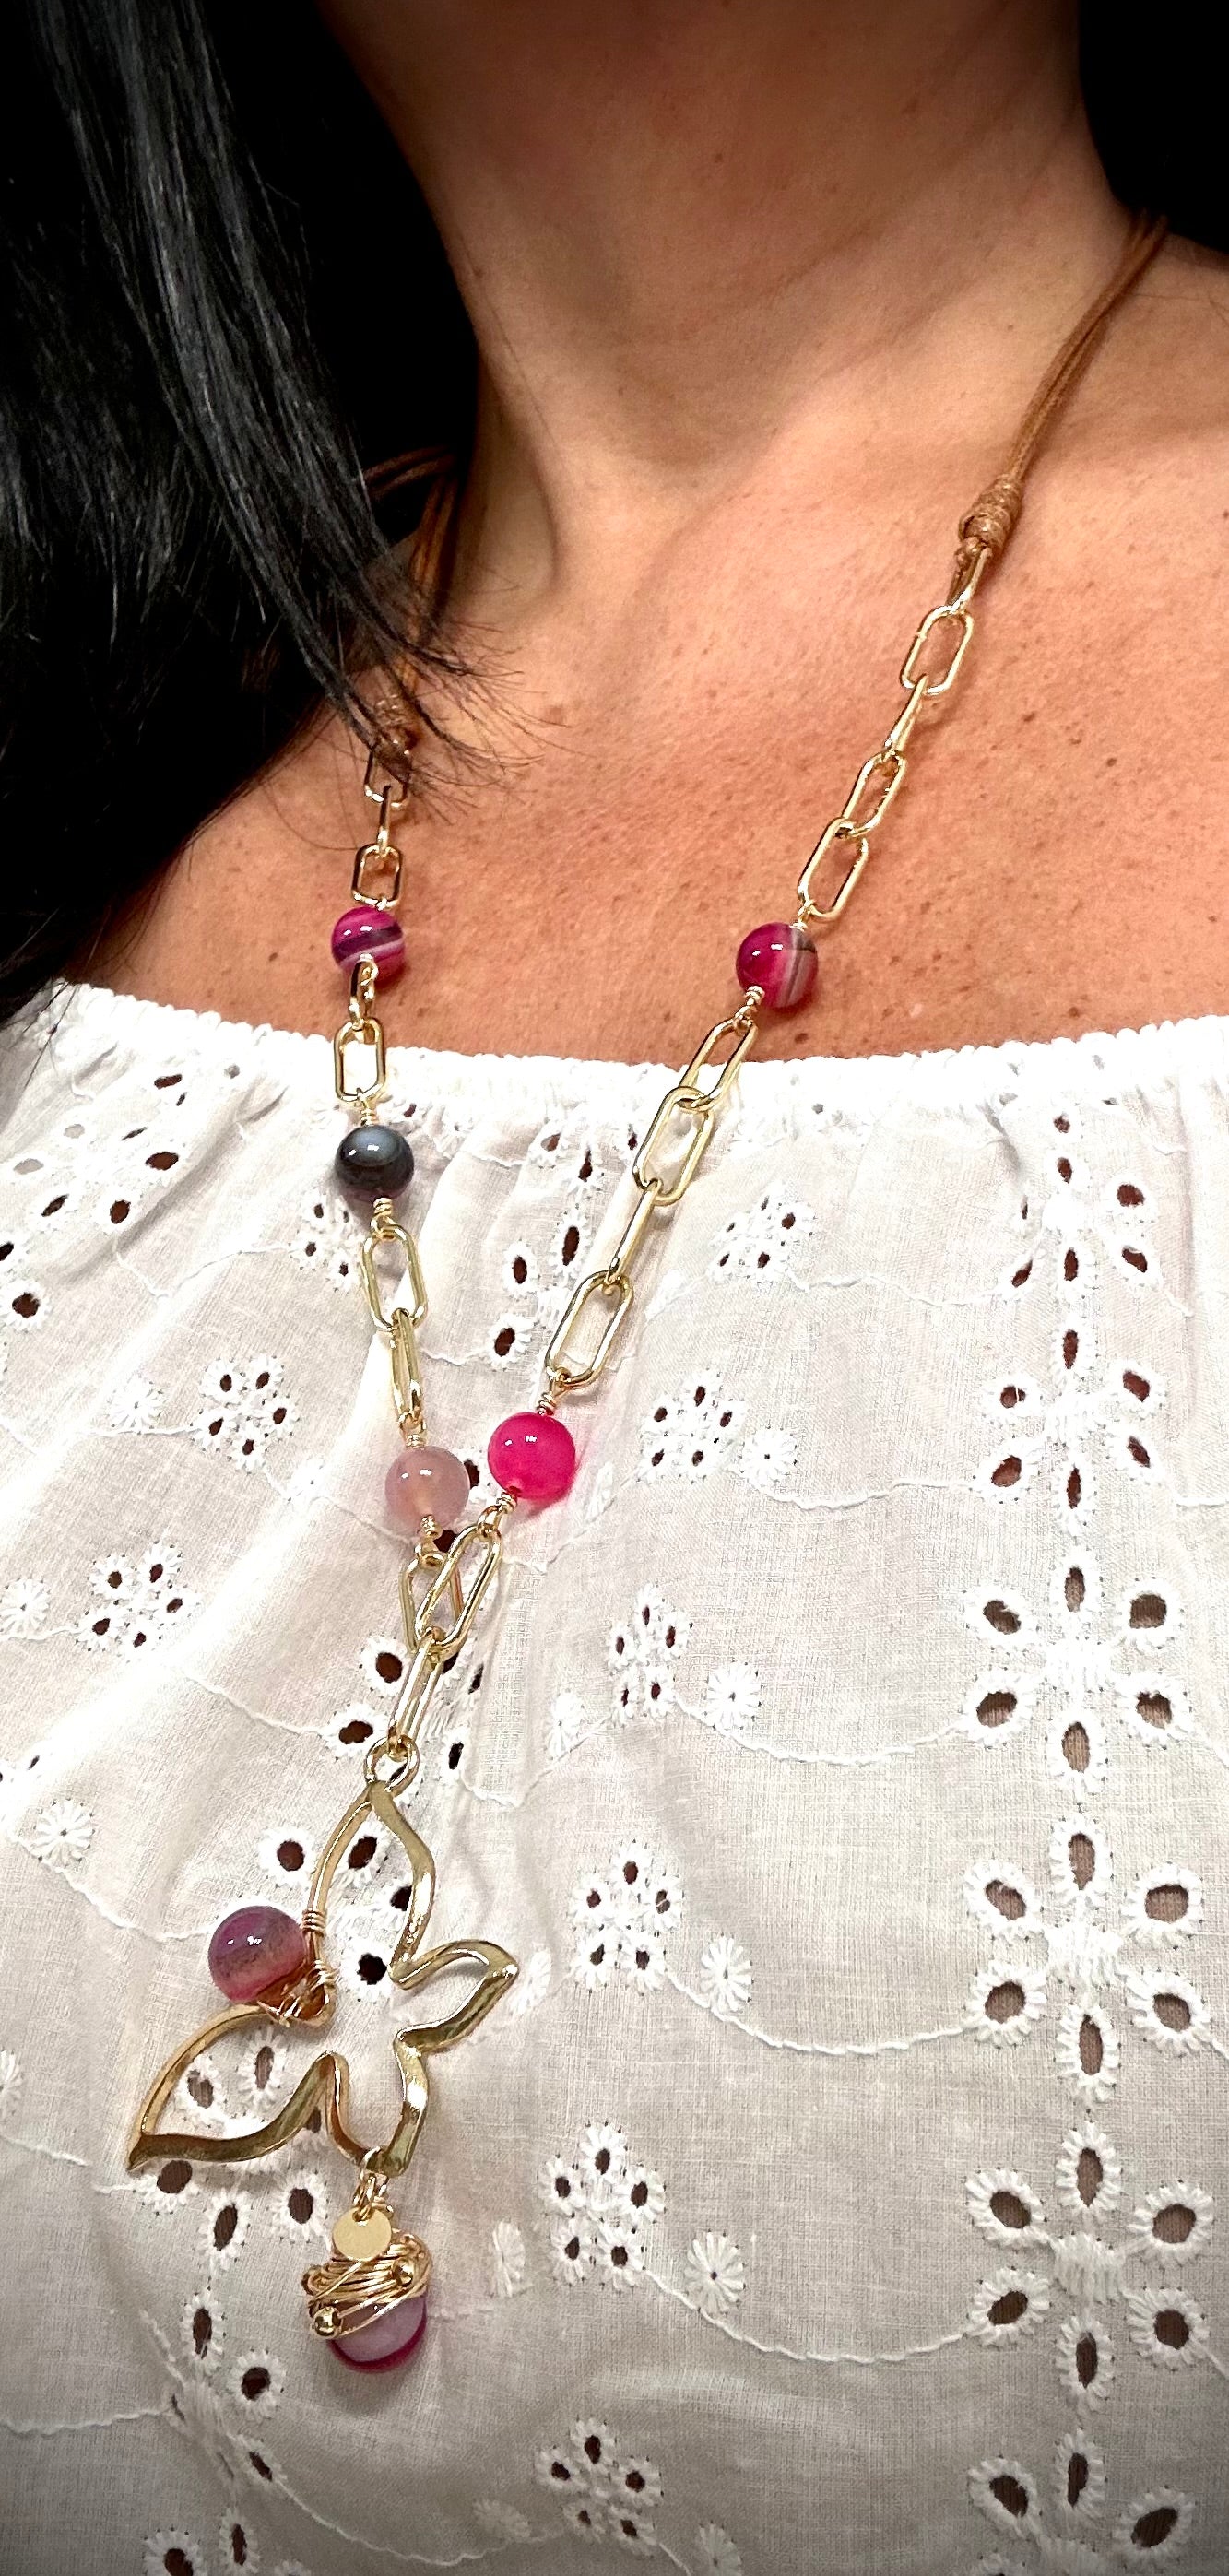 Versatile necklace with magenta striped Agate